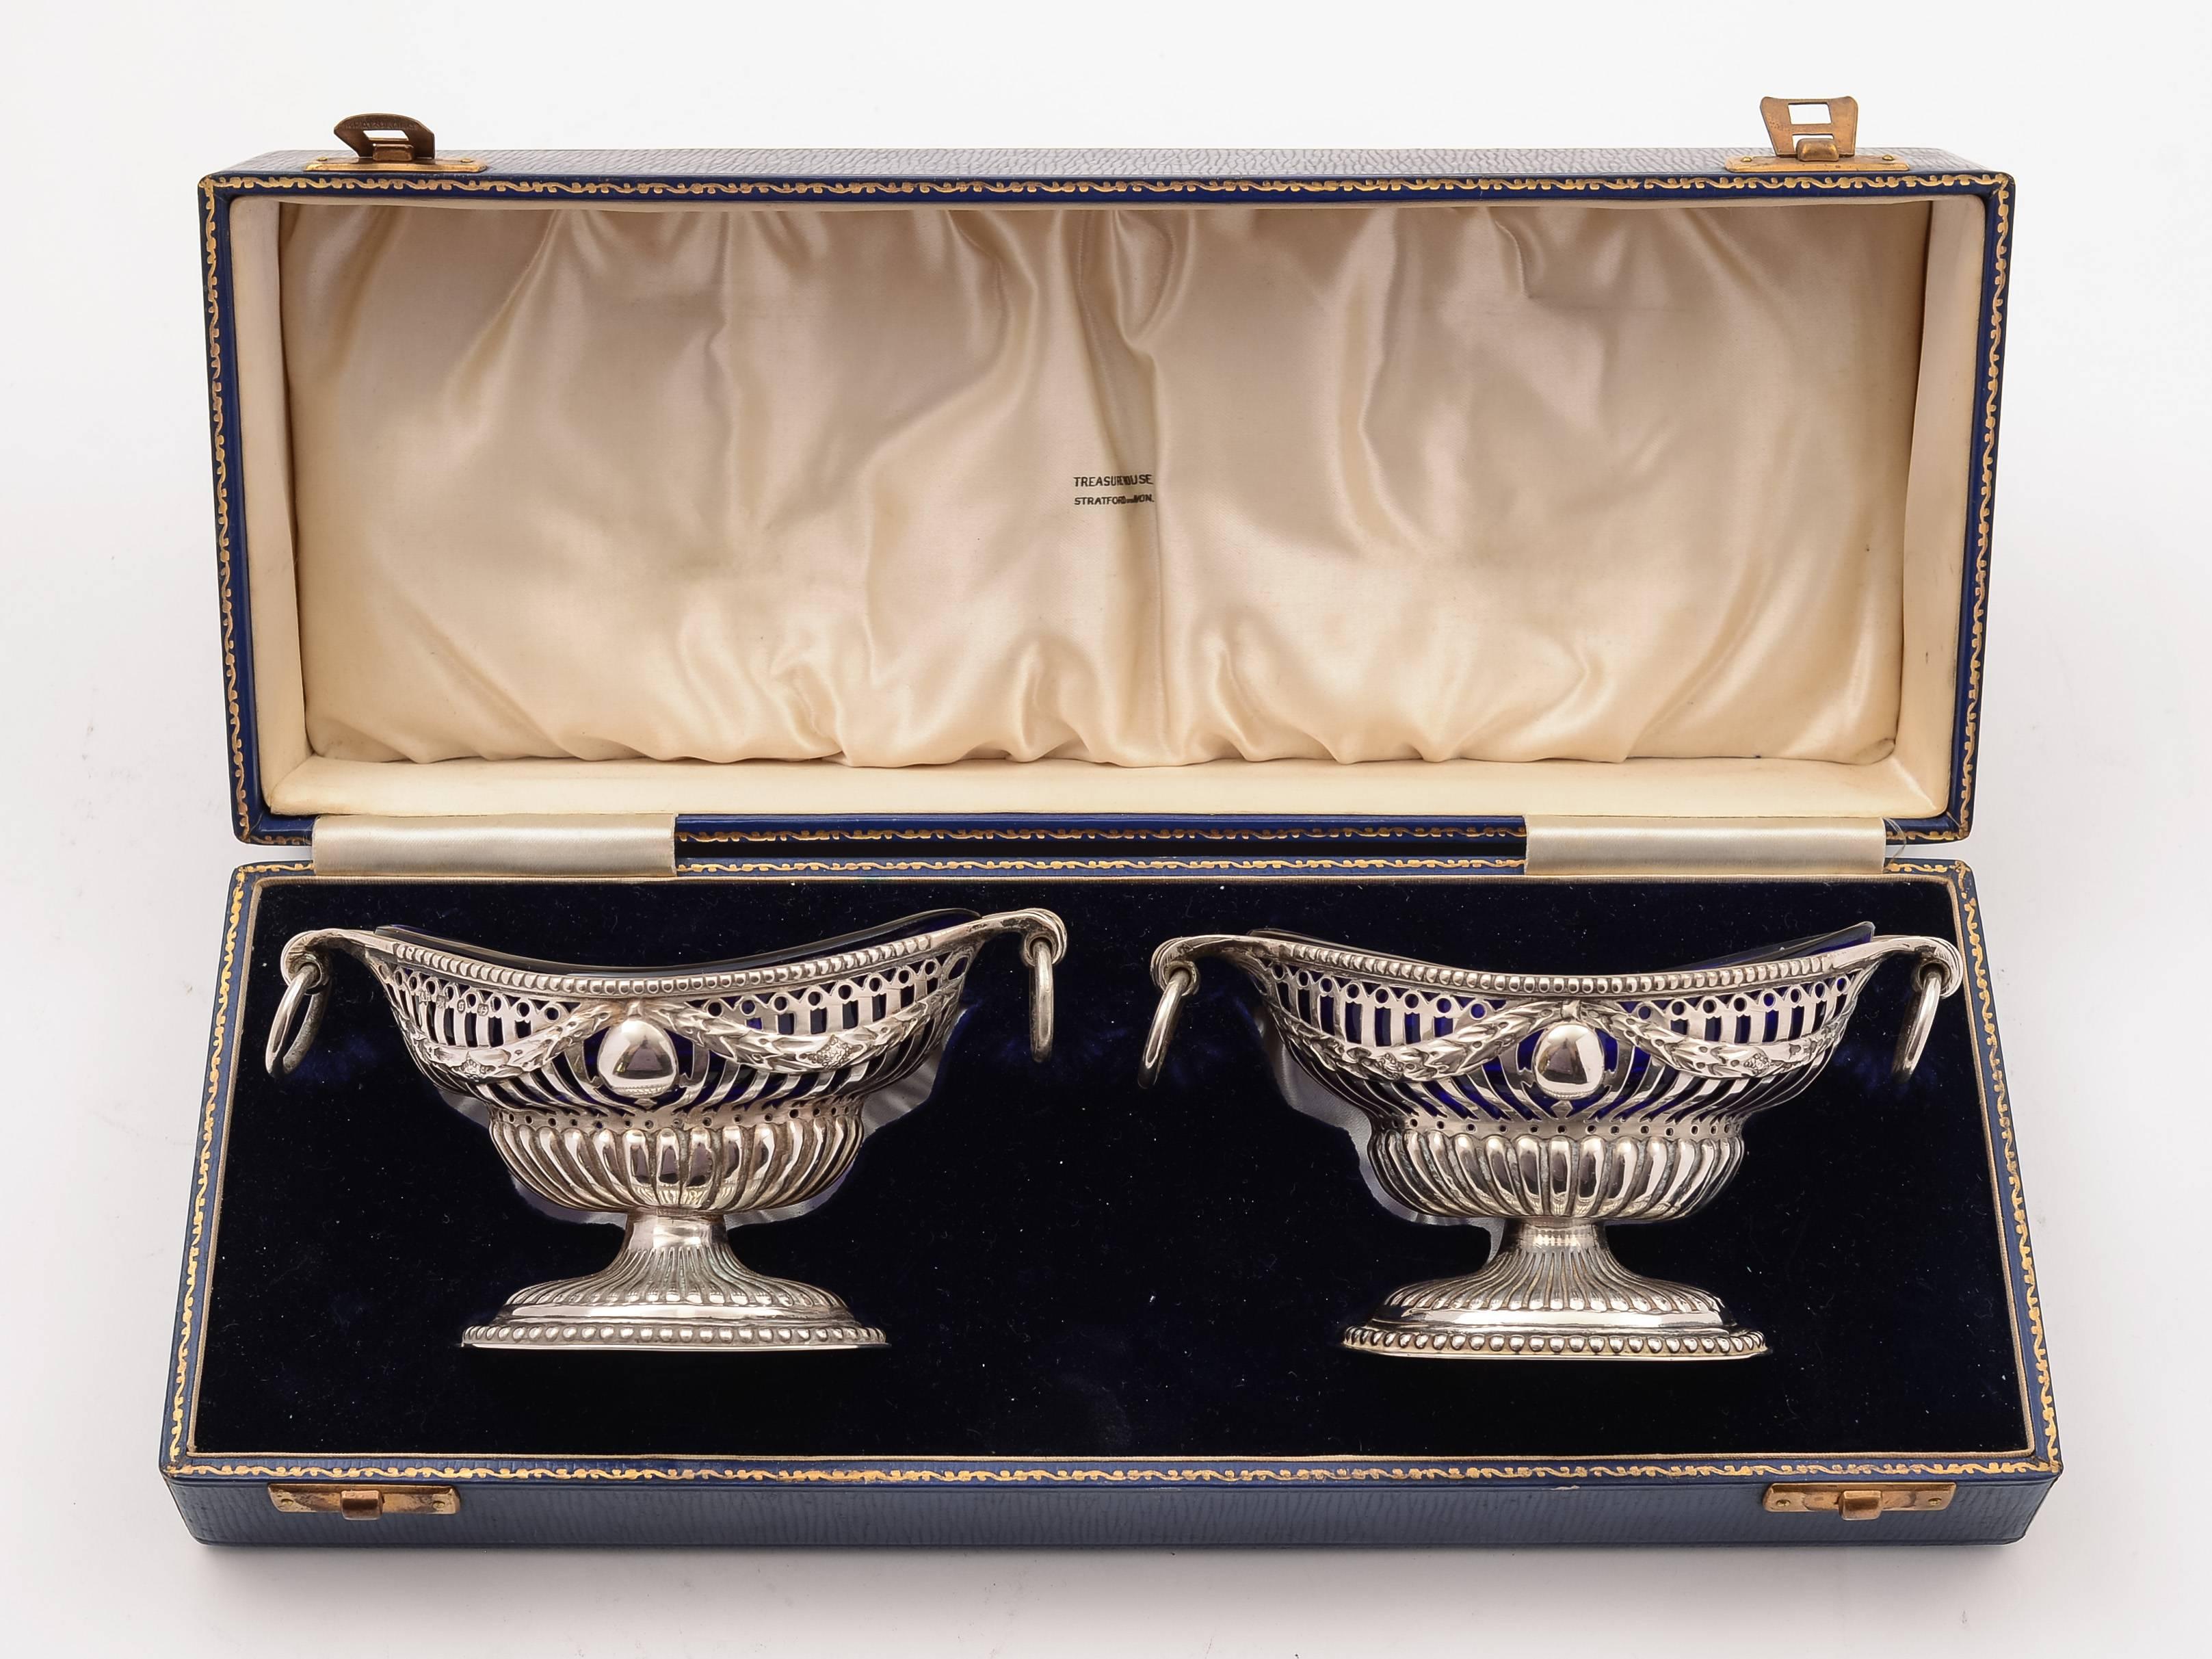 A fabulous cased pair of English Victorian silver salts in the Georgian style with pierced and embossed decoration, ring handles and cobalt blue glass liners. Marked 'H & H' for the maker Harrison & Hipwood and hallmarked Birmingham,